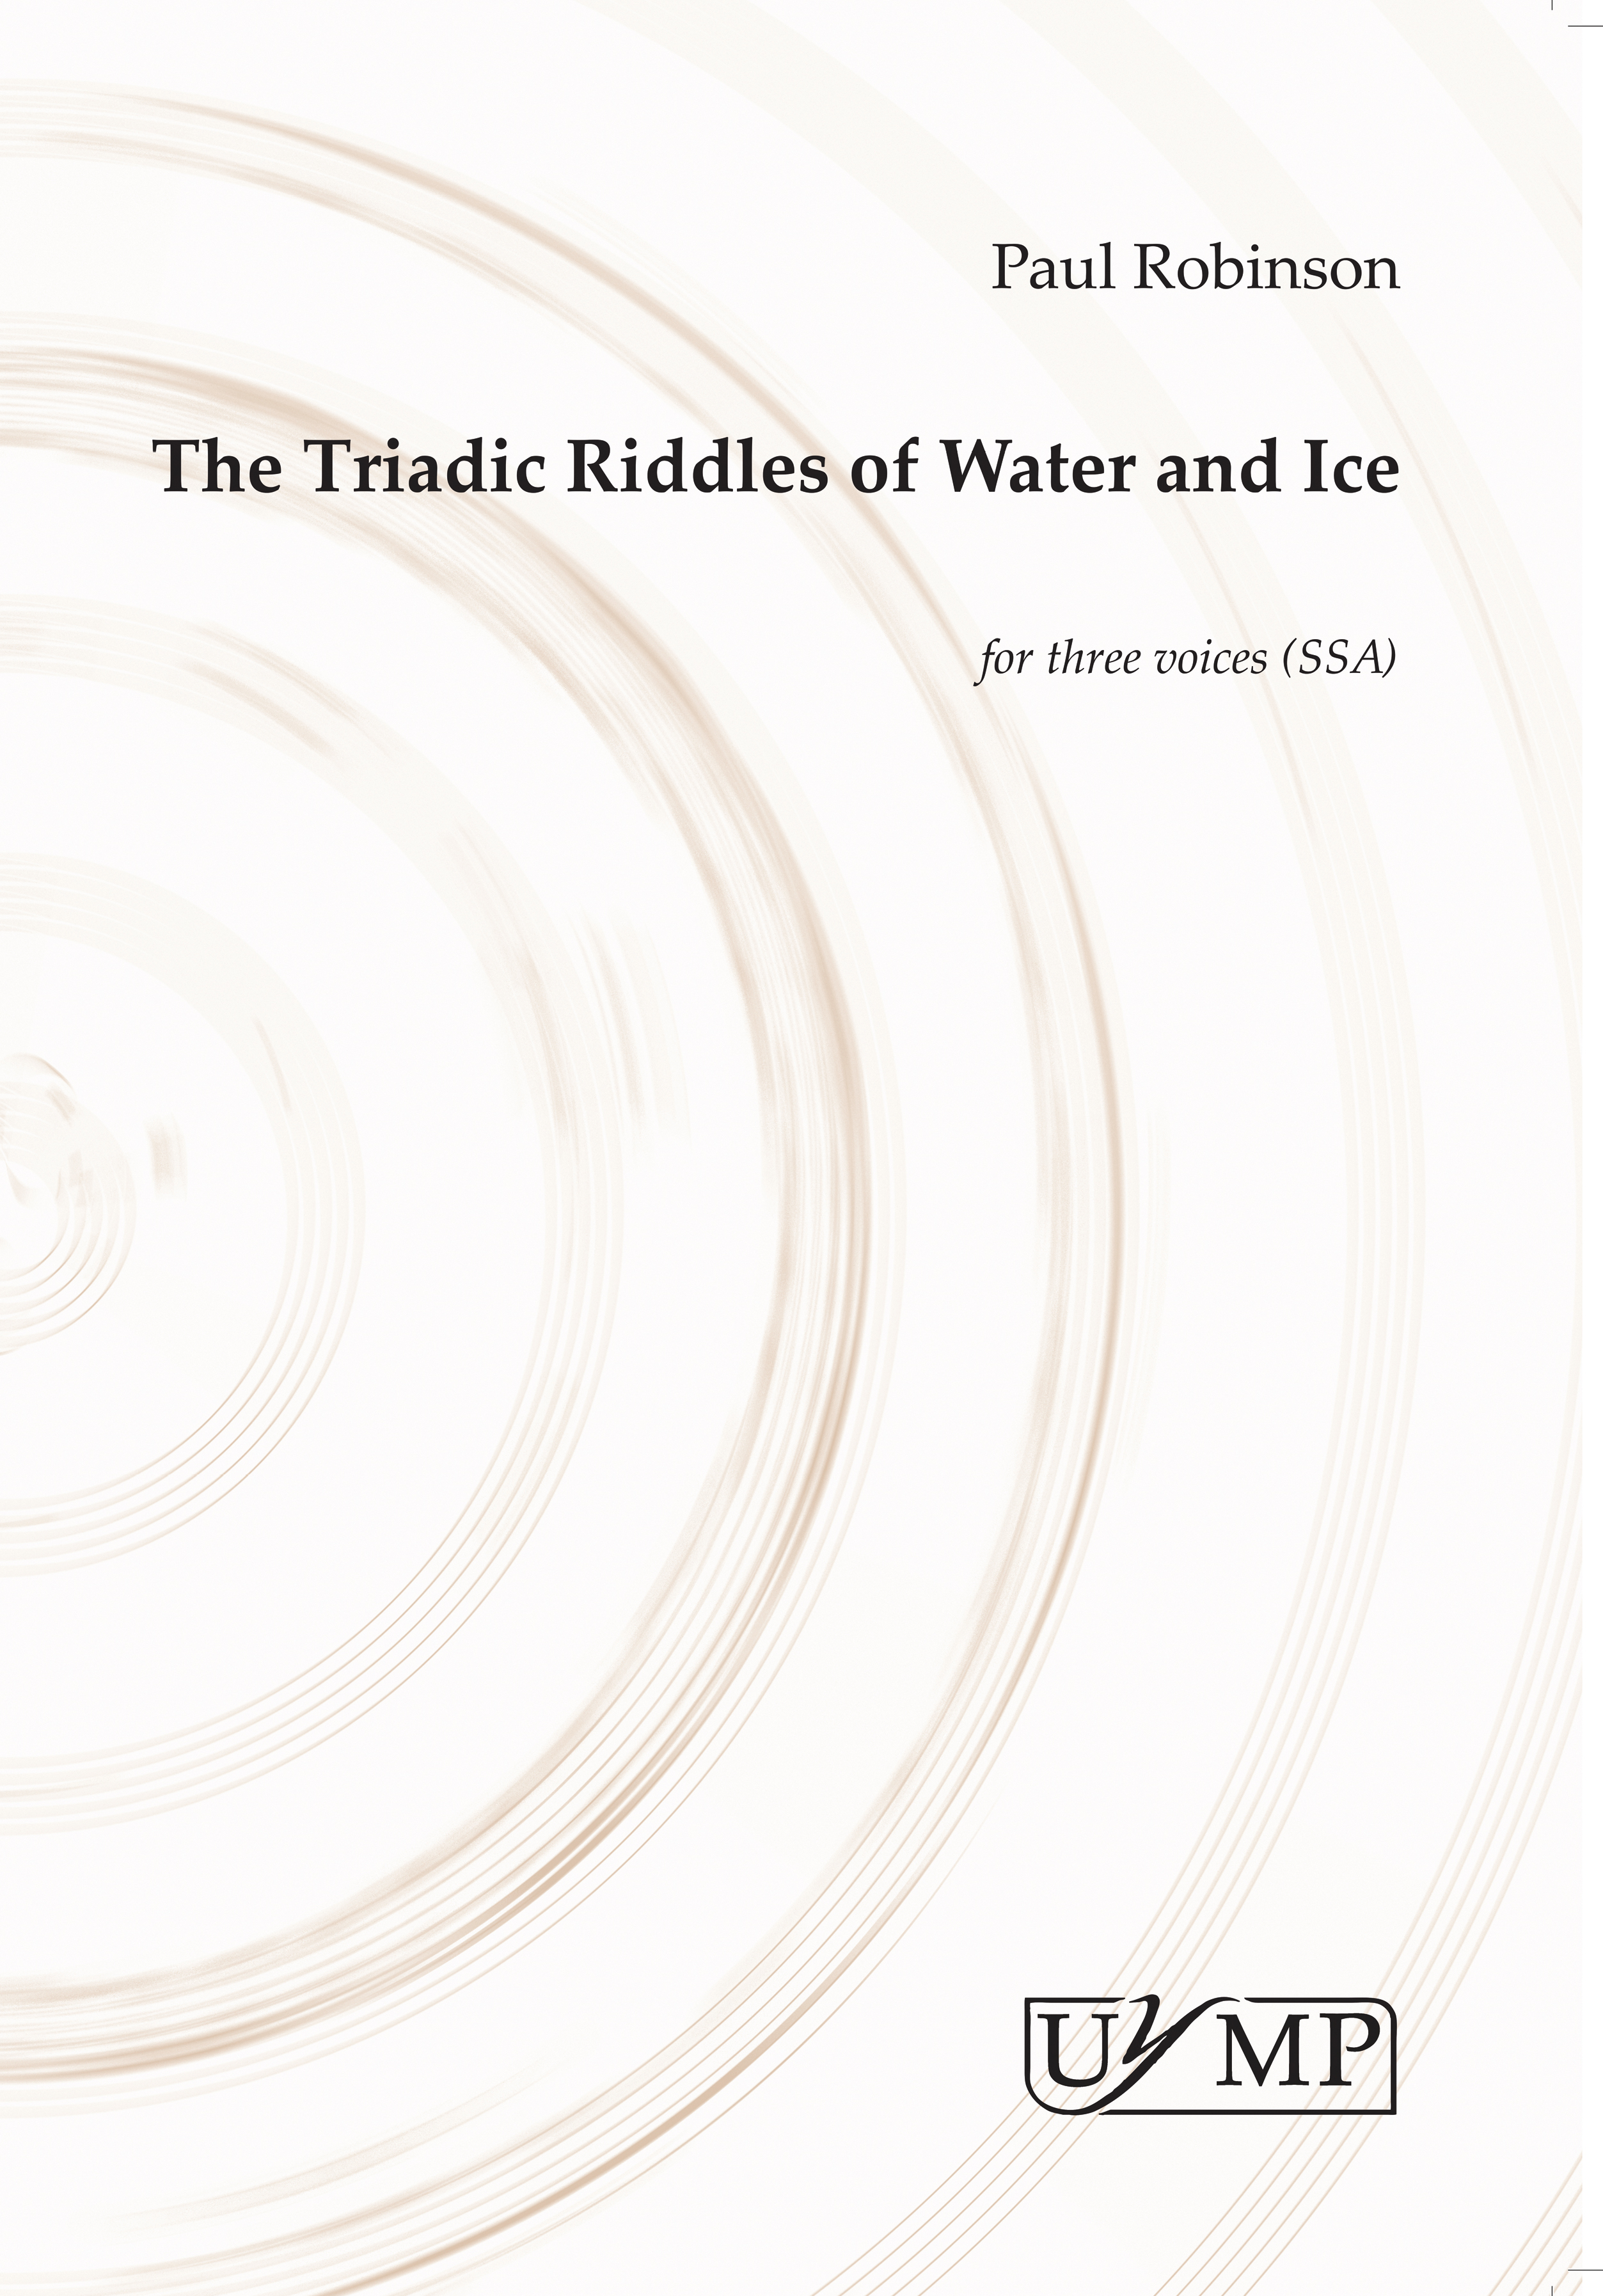 Paul Robinson: The Triadic Riddles Of Water And Ice: SSA: Vocal Score